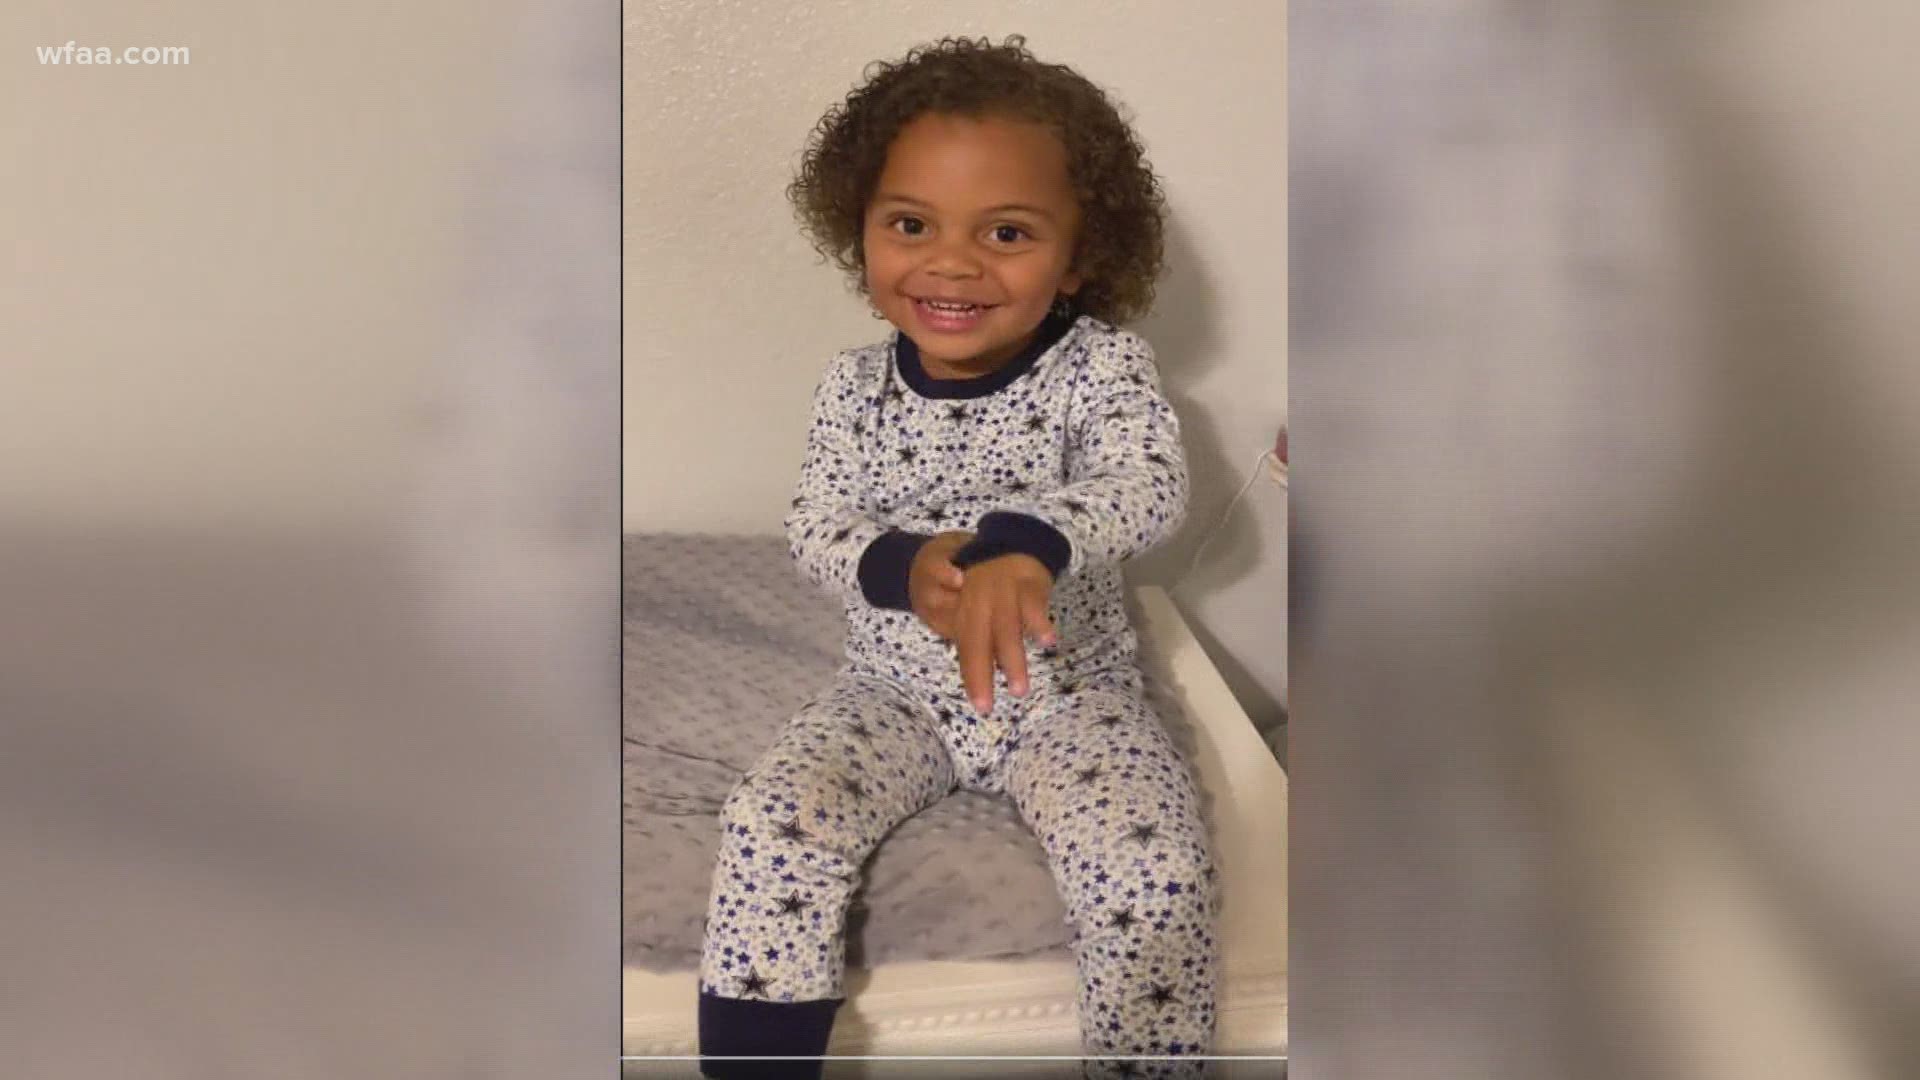 The mother of 2-year-old Bexley says the little girl loves football and insisted on sharing the message for Dallas Cowboys Quarterback Dak Prescott.